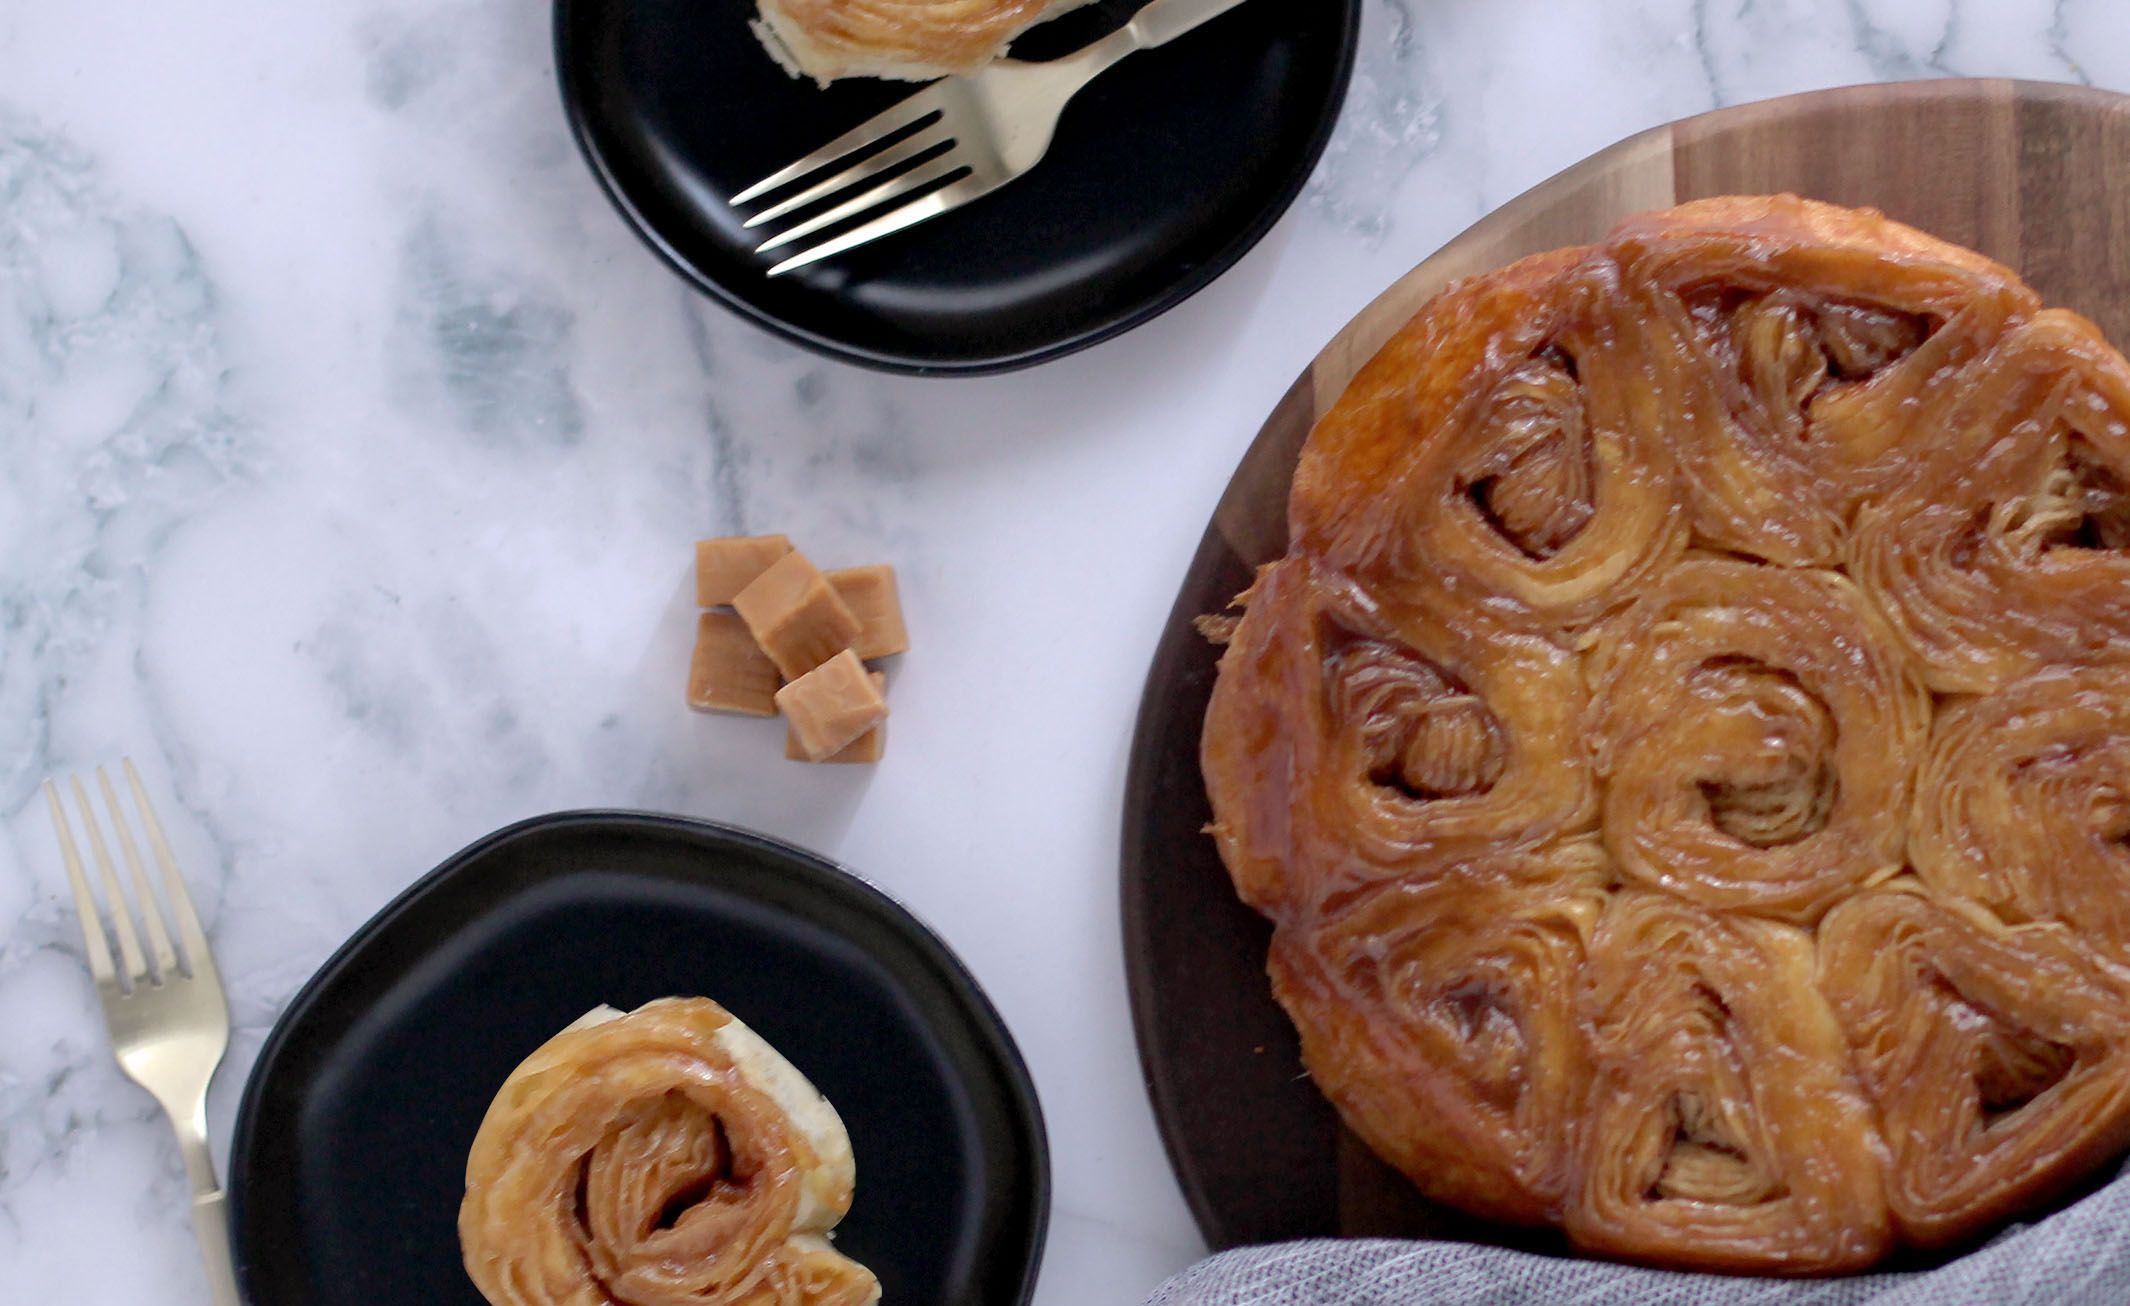 Caramel Pastry Rolls together on a serving platter with two rolls on plates. Caramel candy pieces used as garnish.